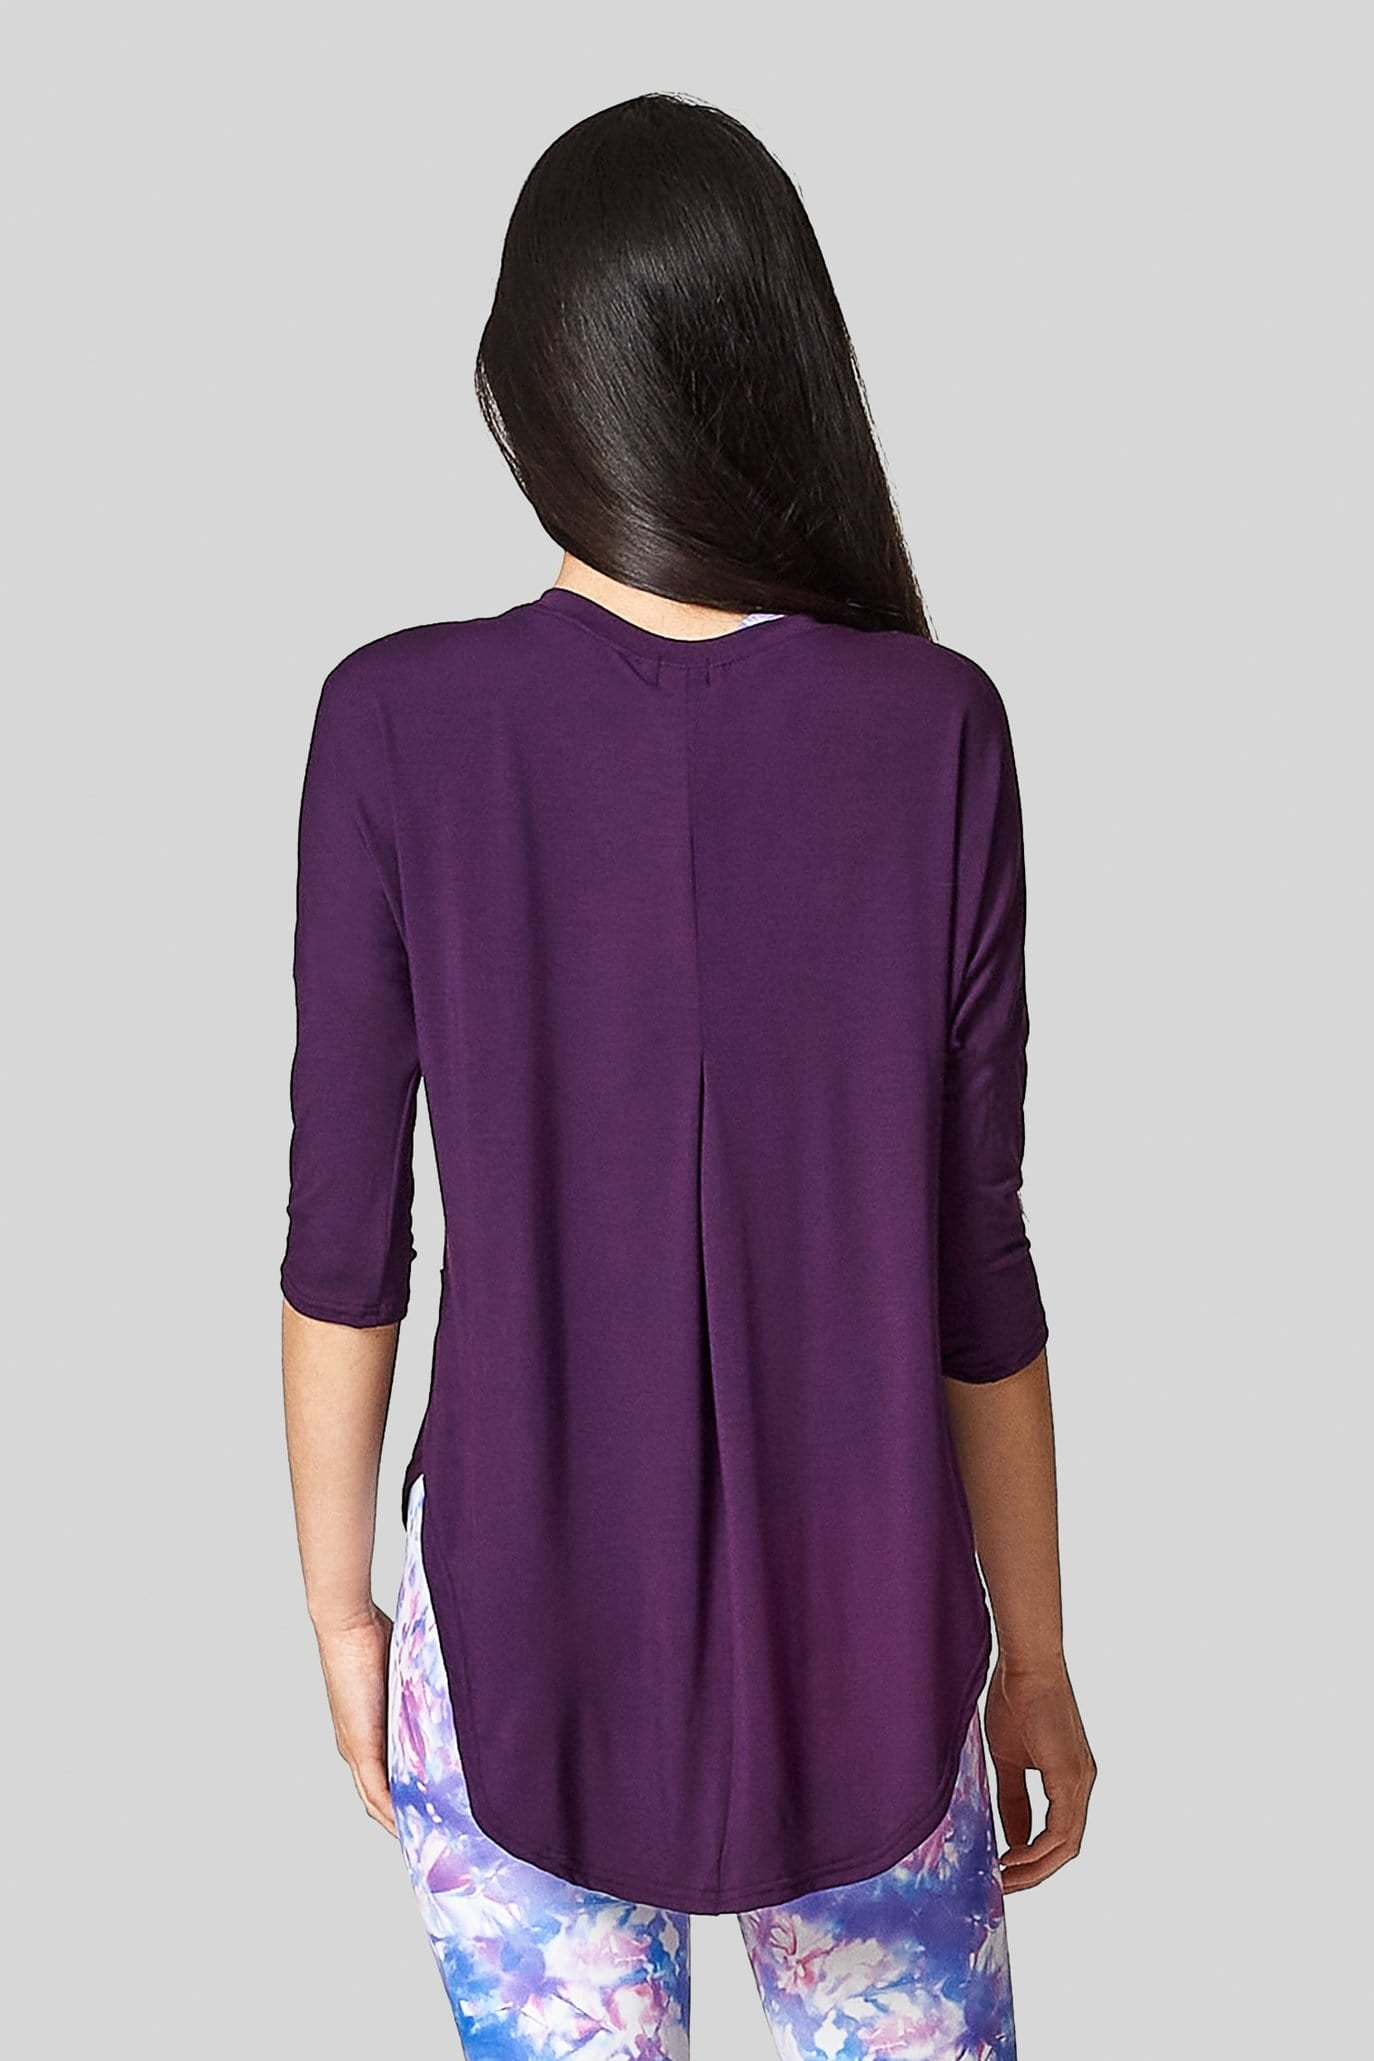 A woman wears a plum t-shirt with a long hem & pleat at the back.